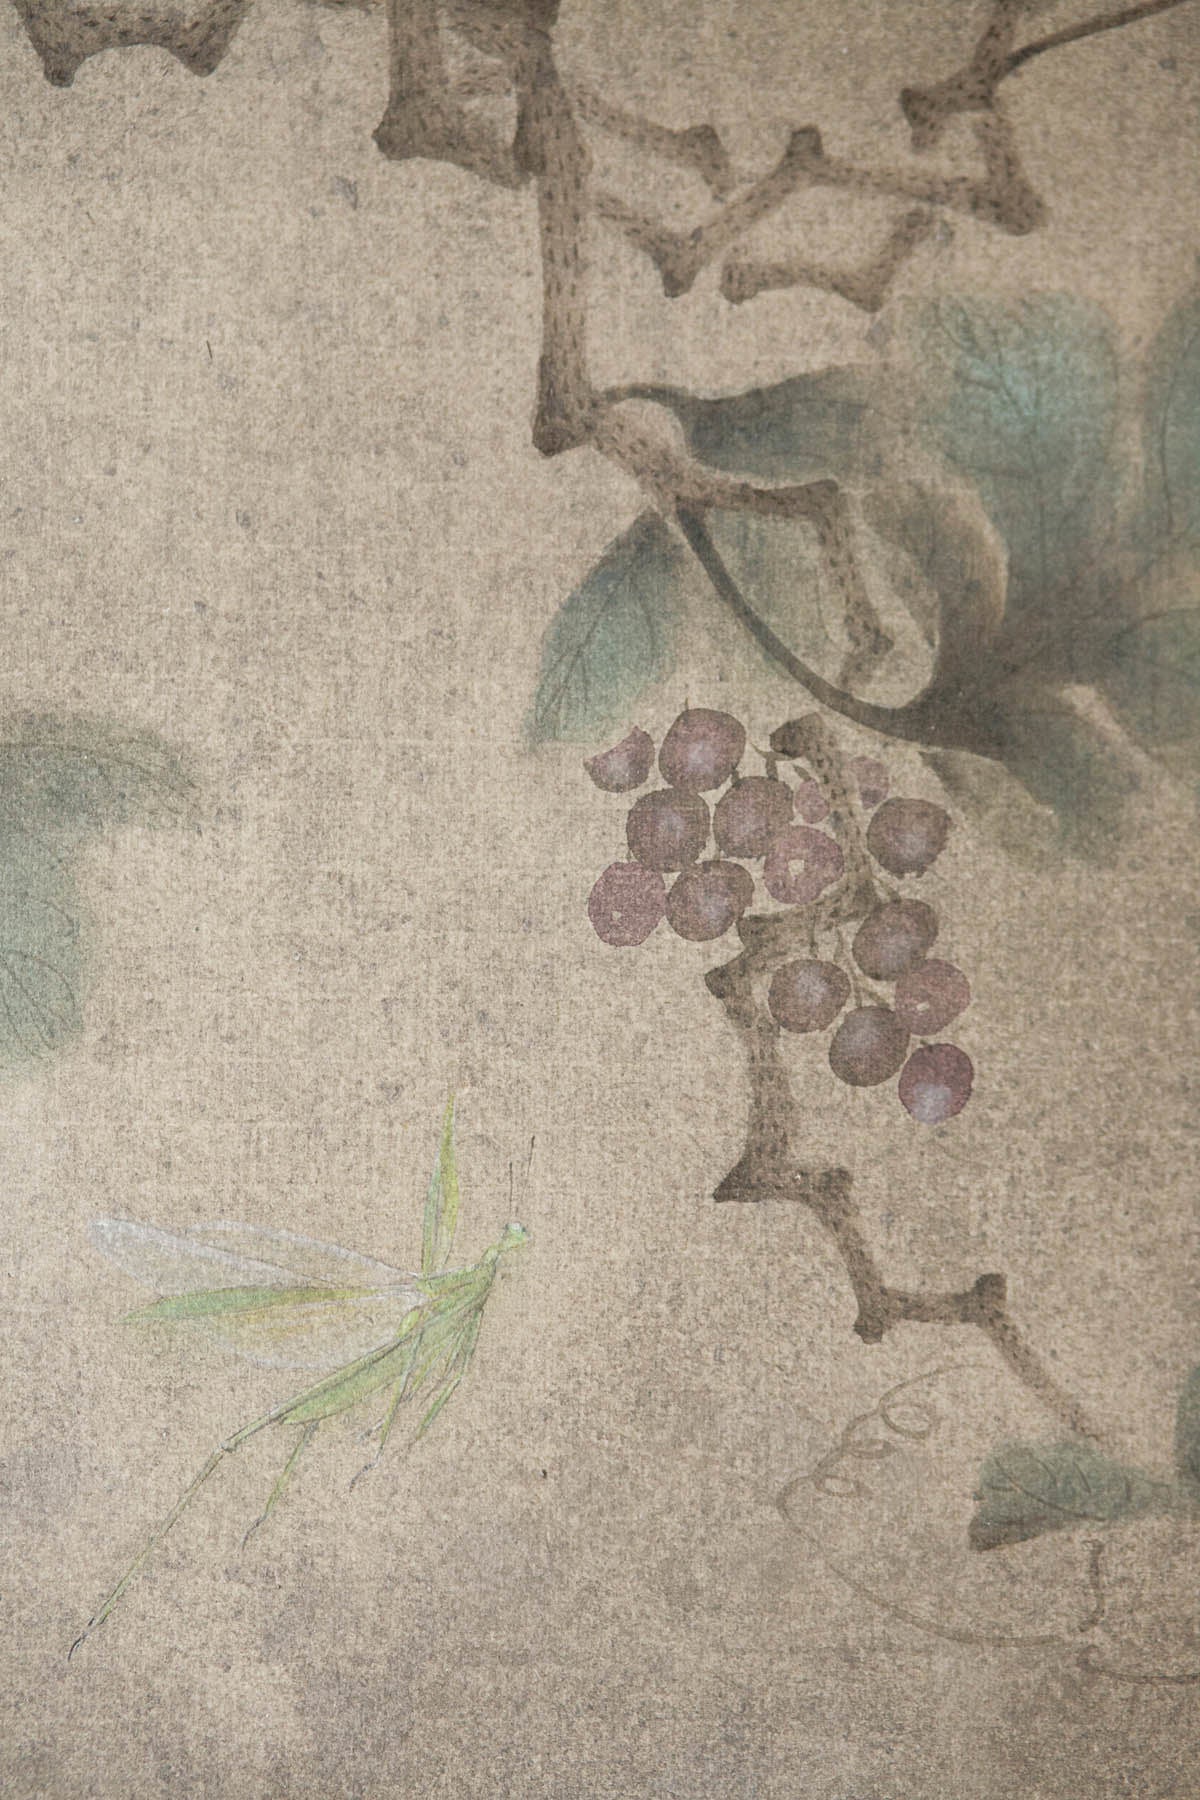 Grapevine Moment #1 Painting by Sung Tze-Chin